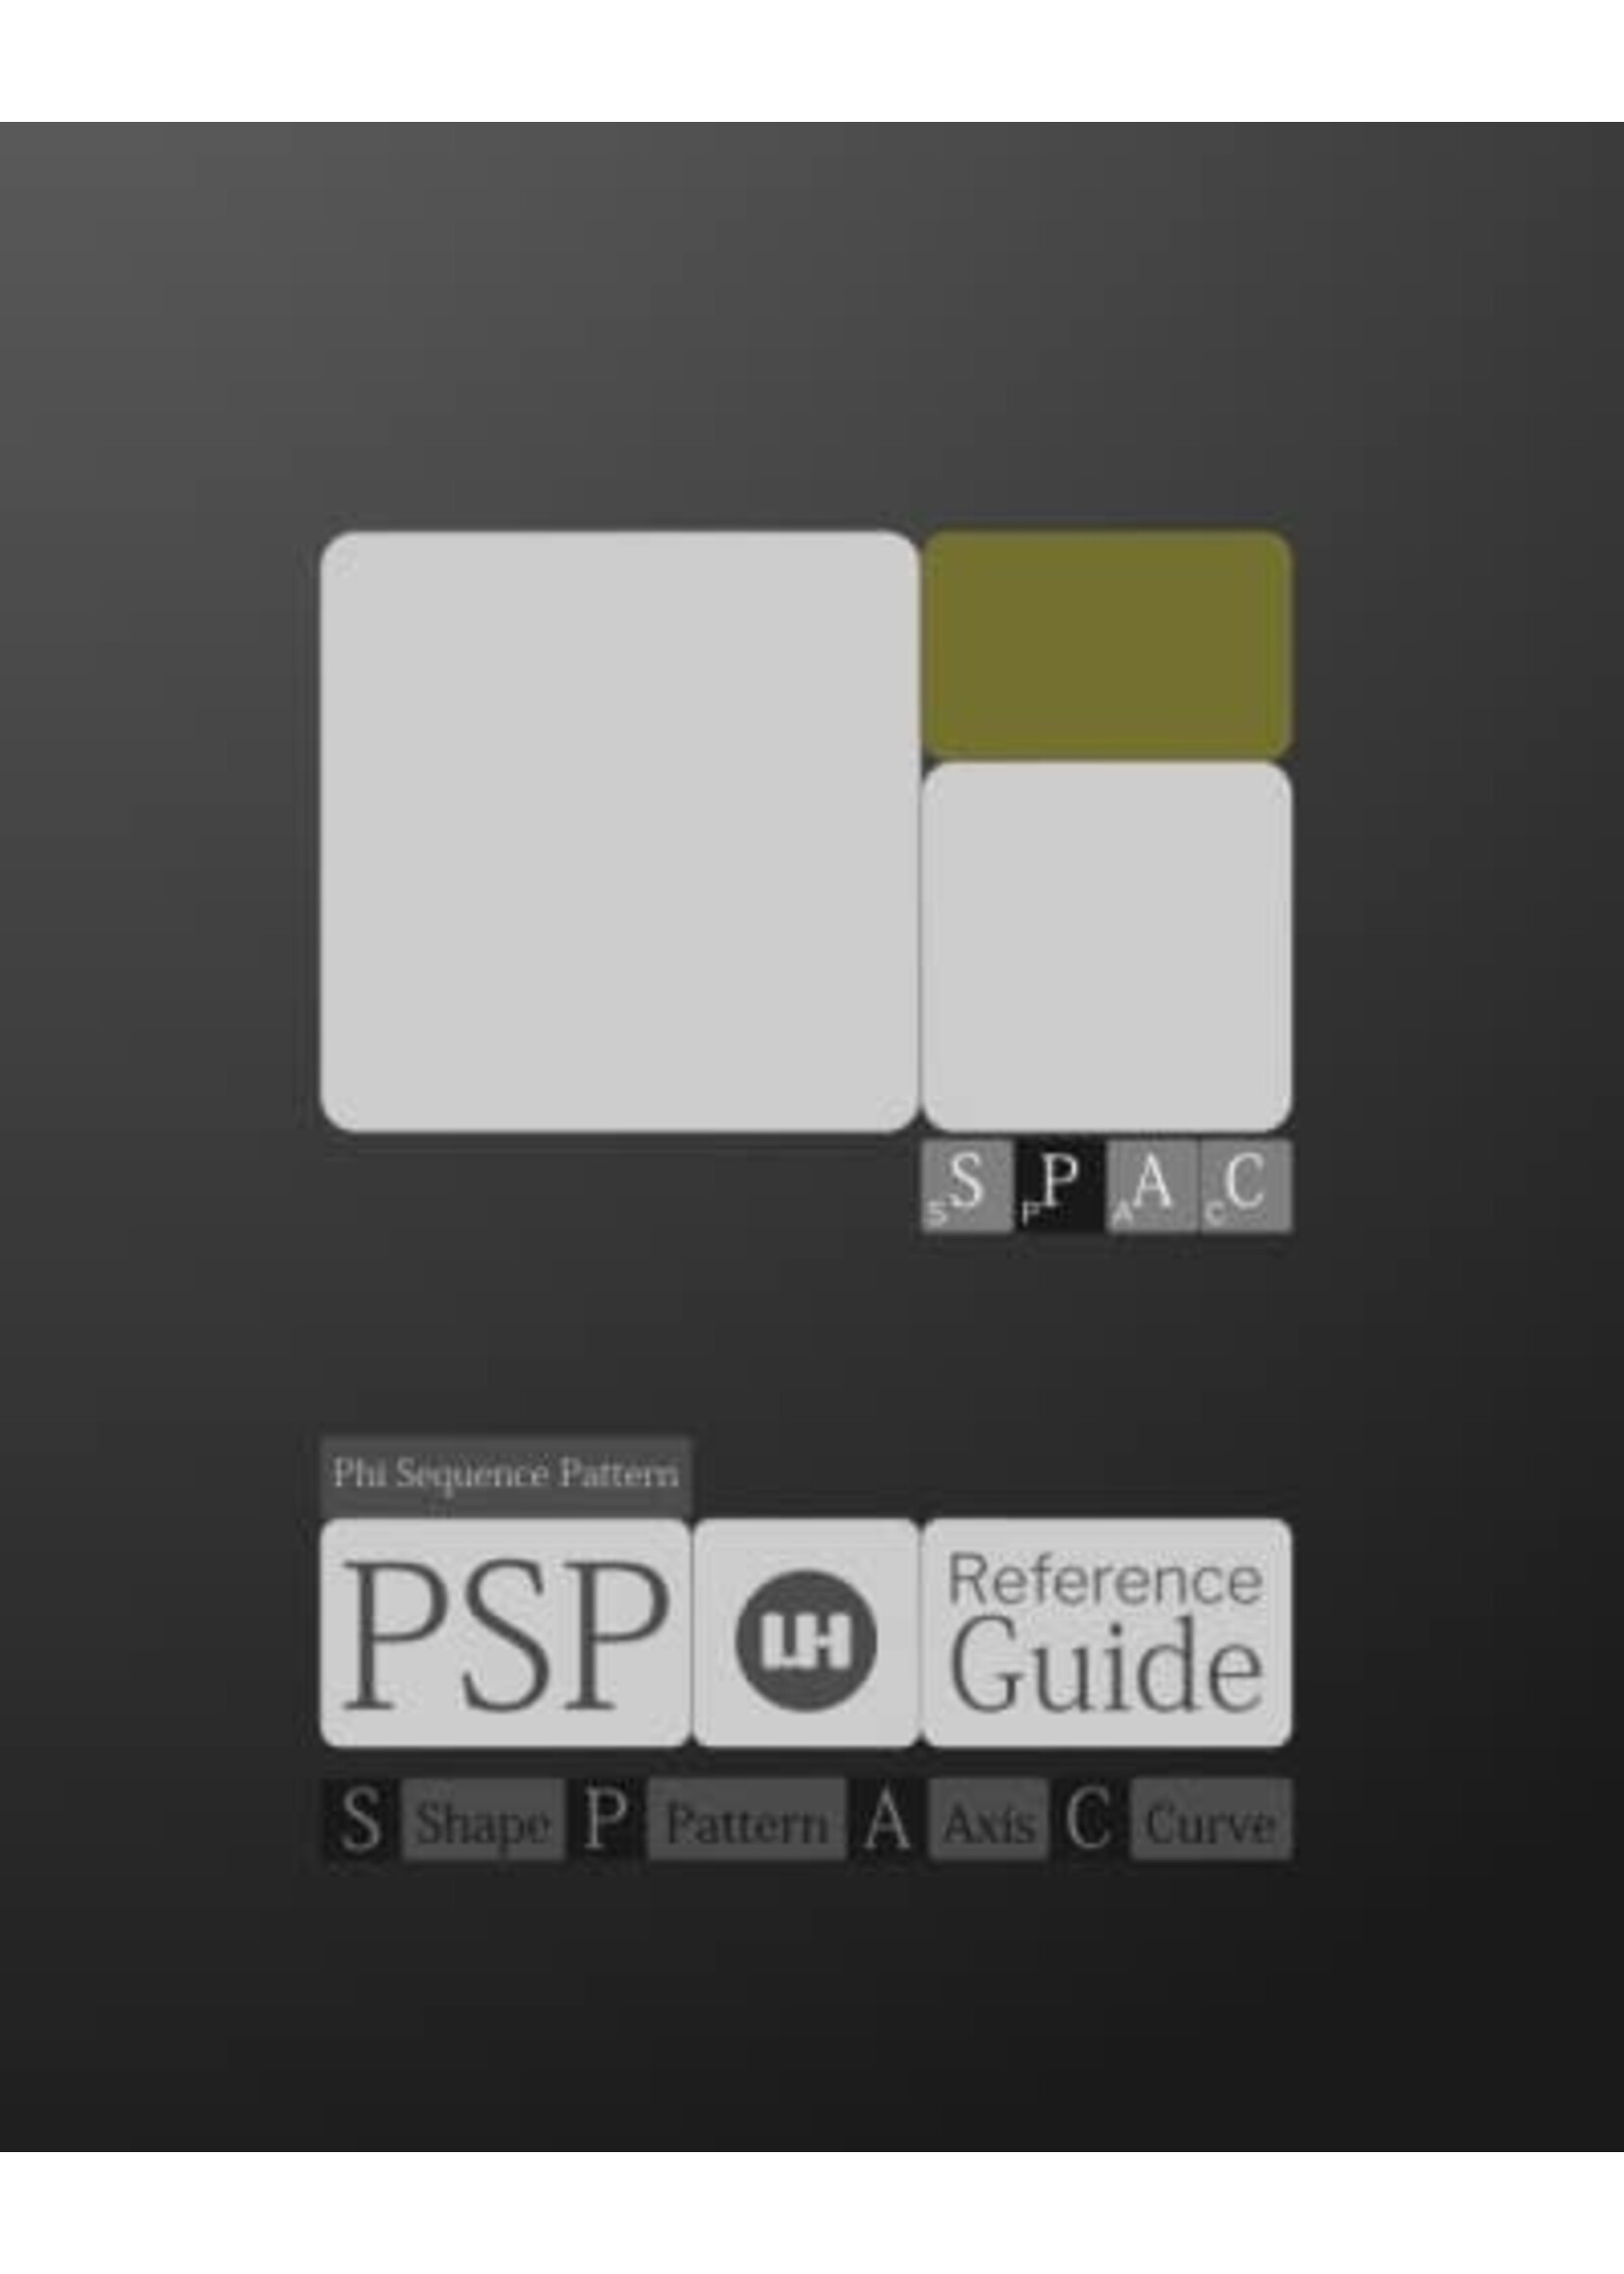 Phi Code - A PSP Reference Guide: Observing the world of Phi Sequence Patterns by L. How